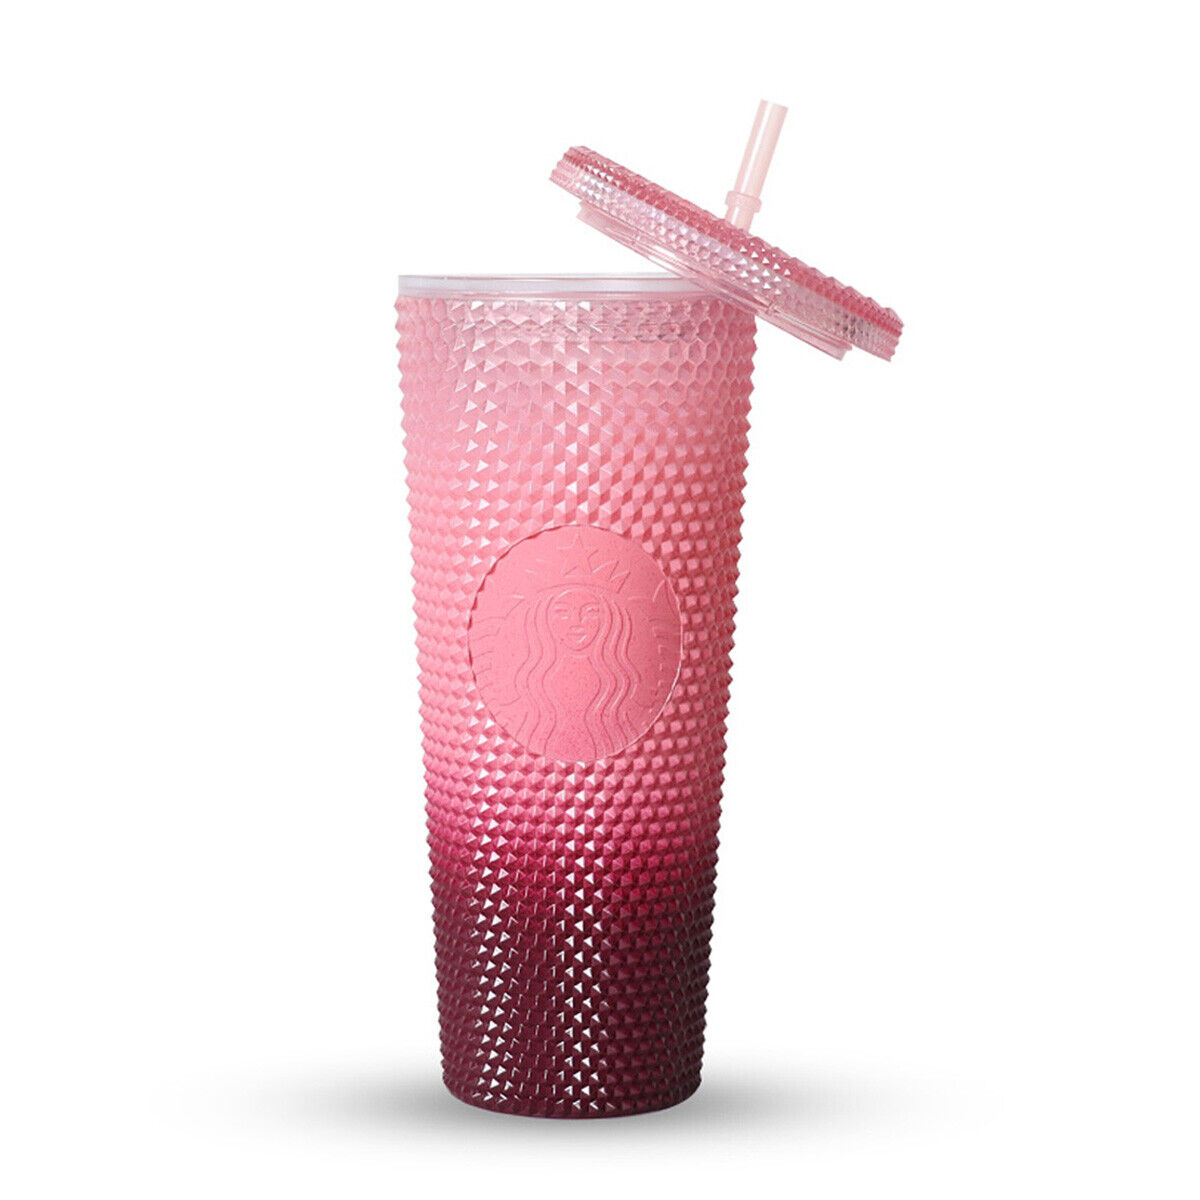 New Gradient Pink - Starbucks 24oz Cold Drink Cup Diamond Studded Tumbler Gift